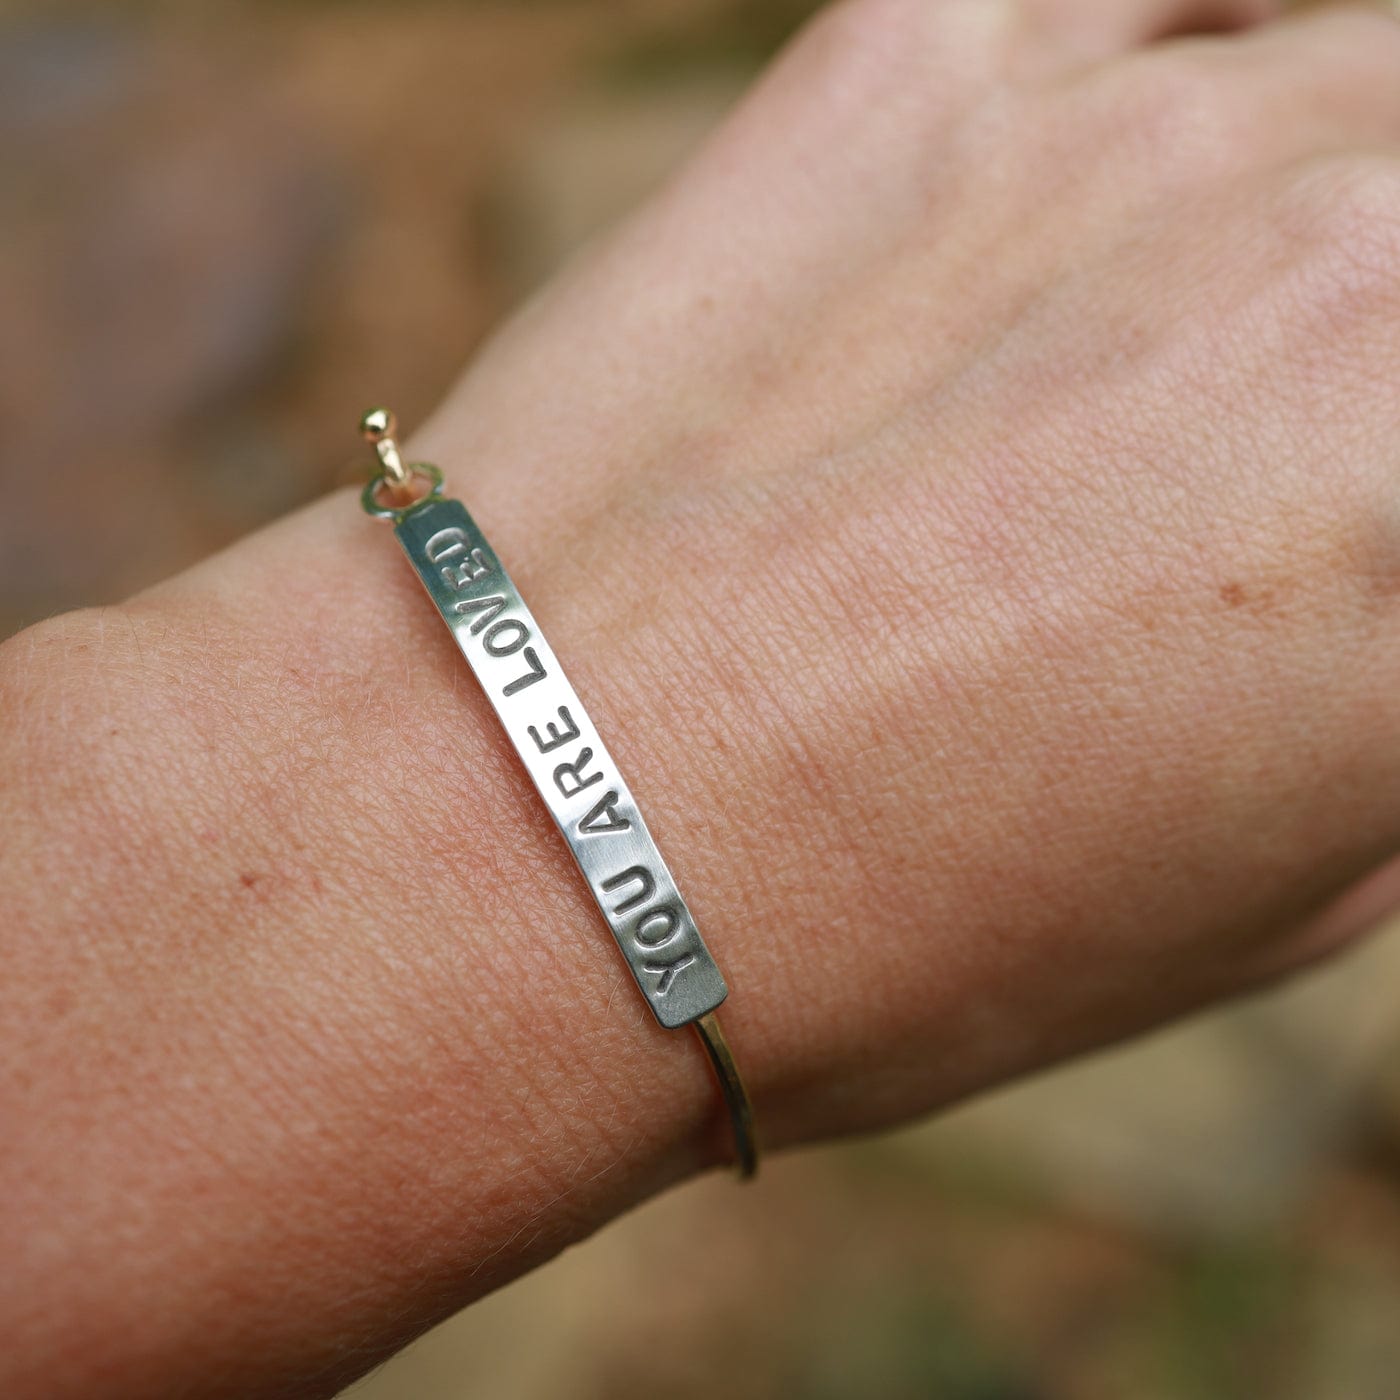 BRC "Say It" Word Bracelet - You Are Loved